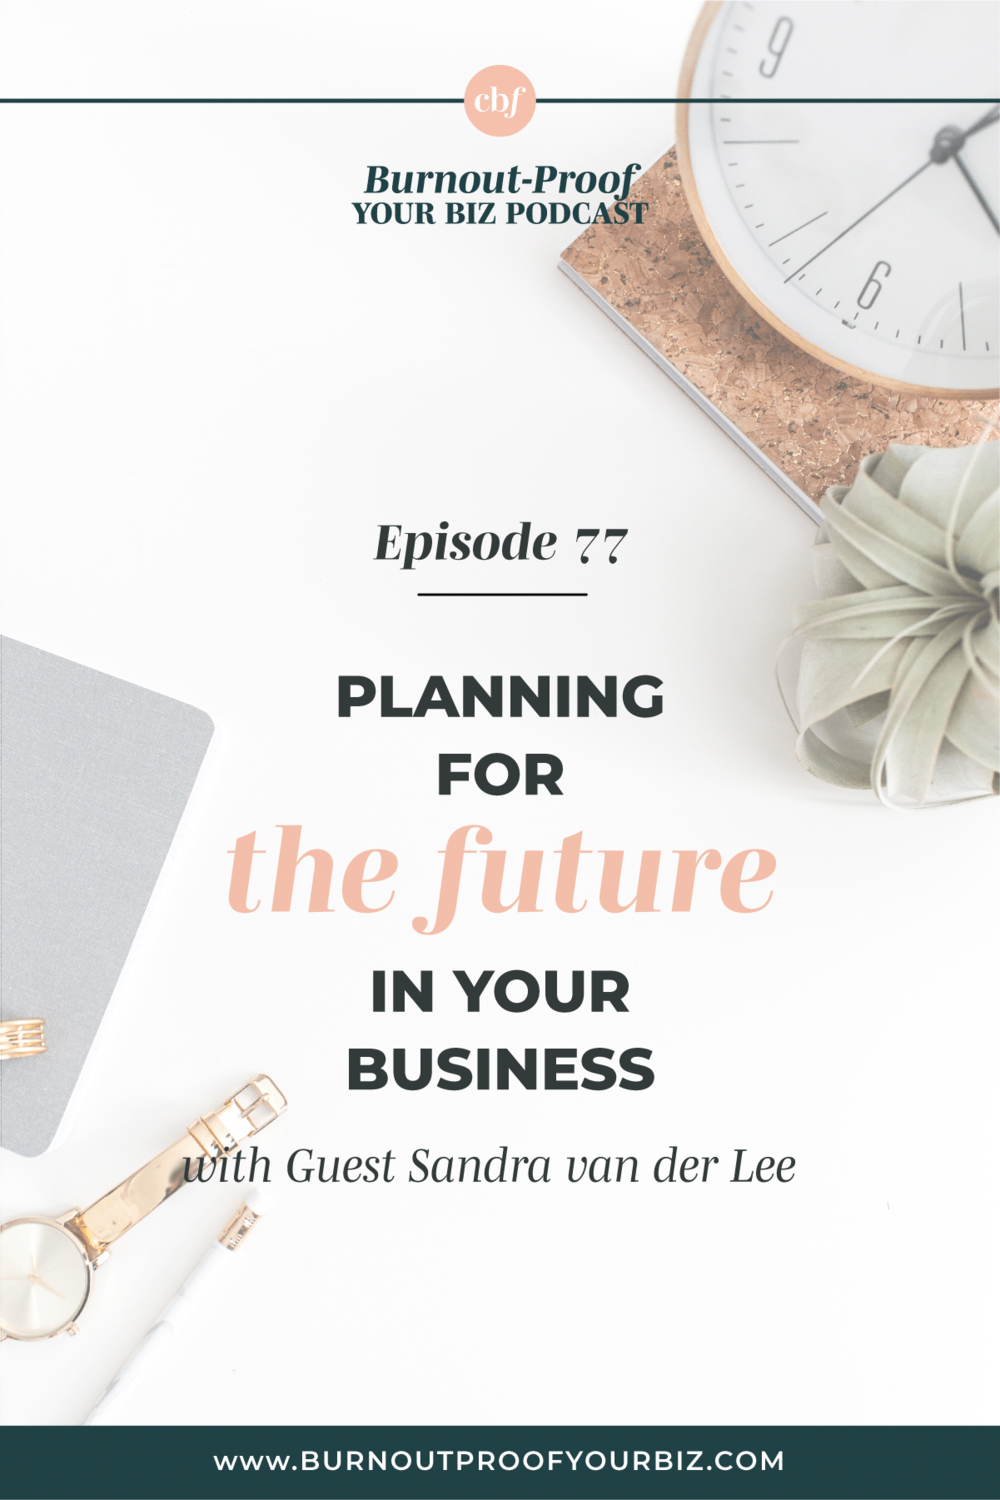 Finding Scalability for Your Business in an Unexpected Way with Sandra Van Der Lee